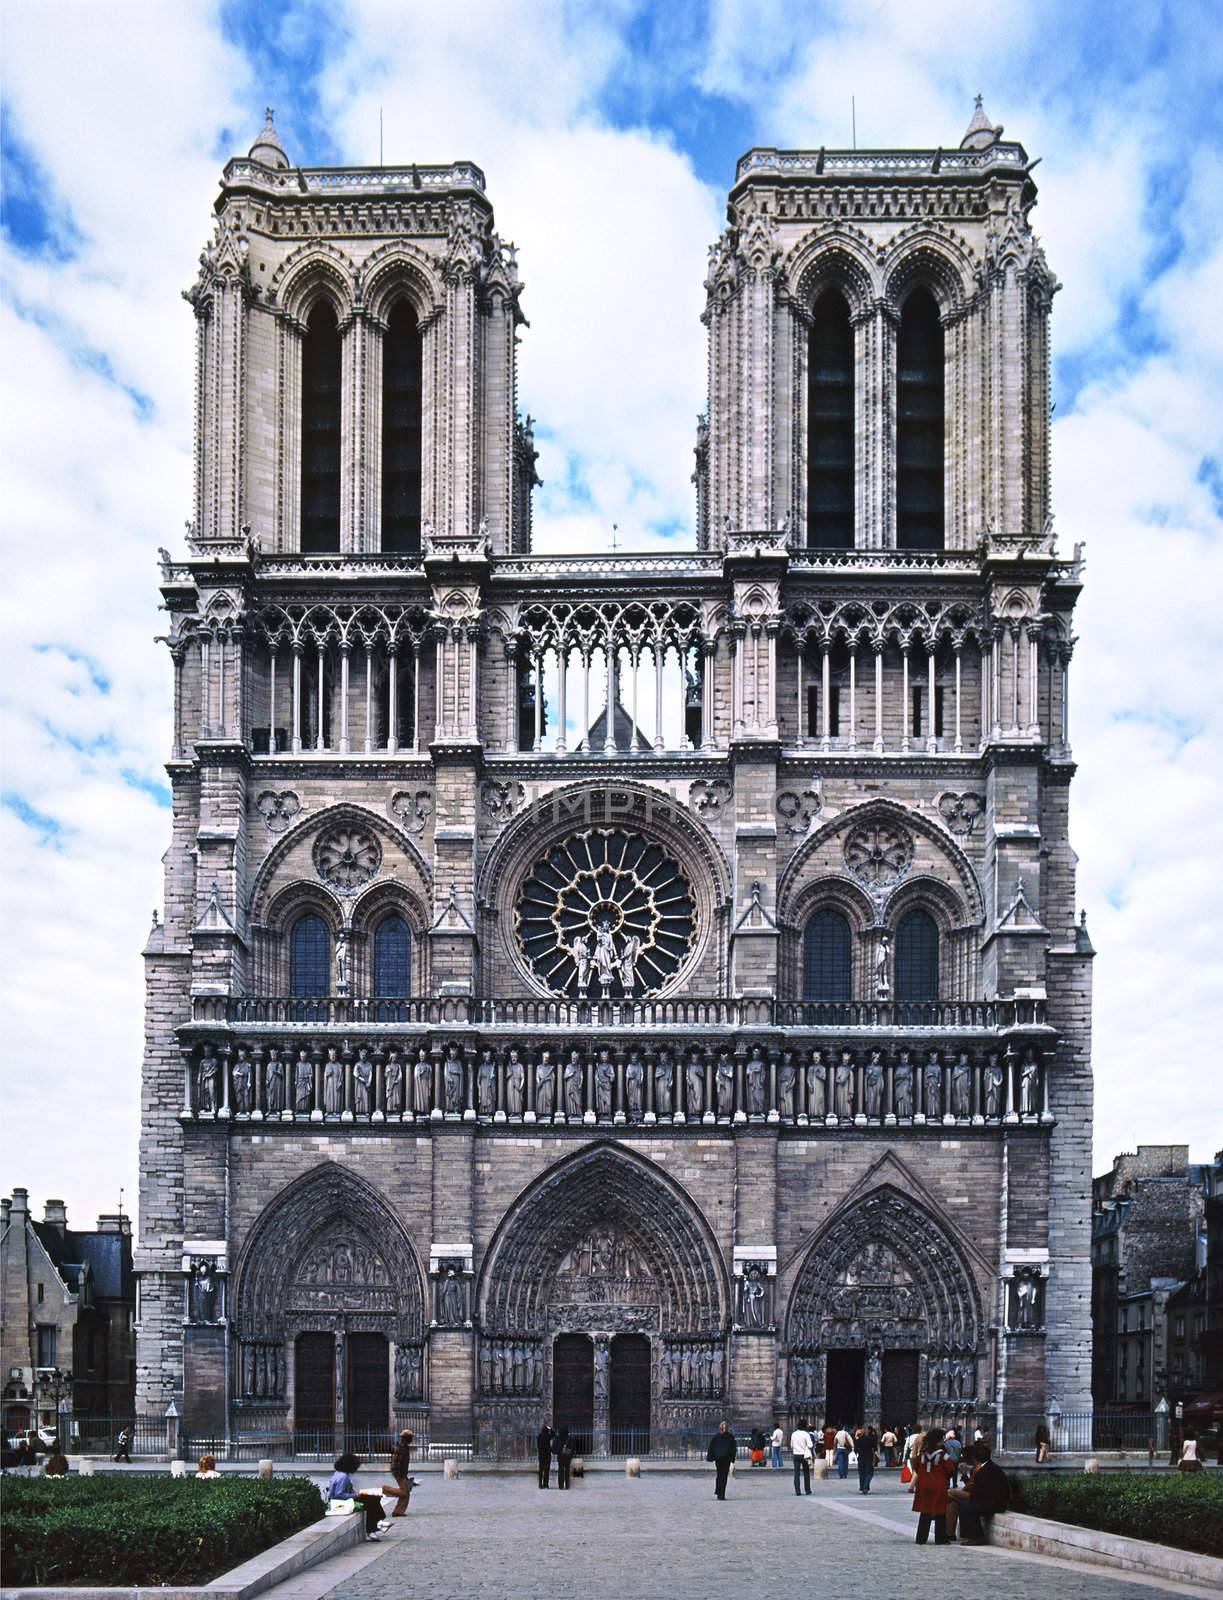 Notre Dame de Paris cathedral photographed before cleaning